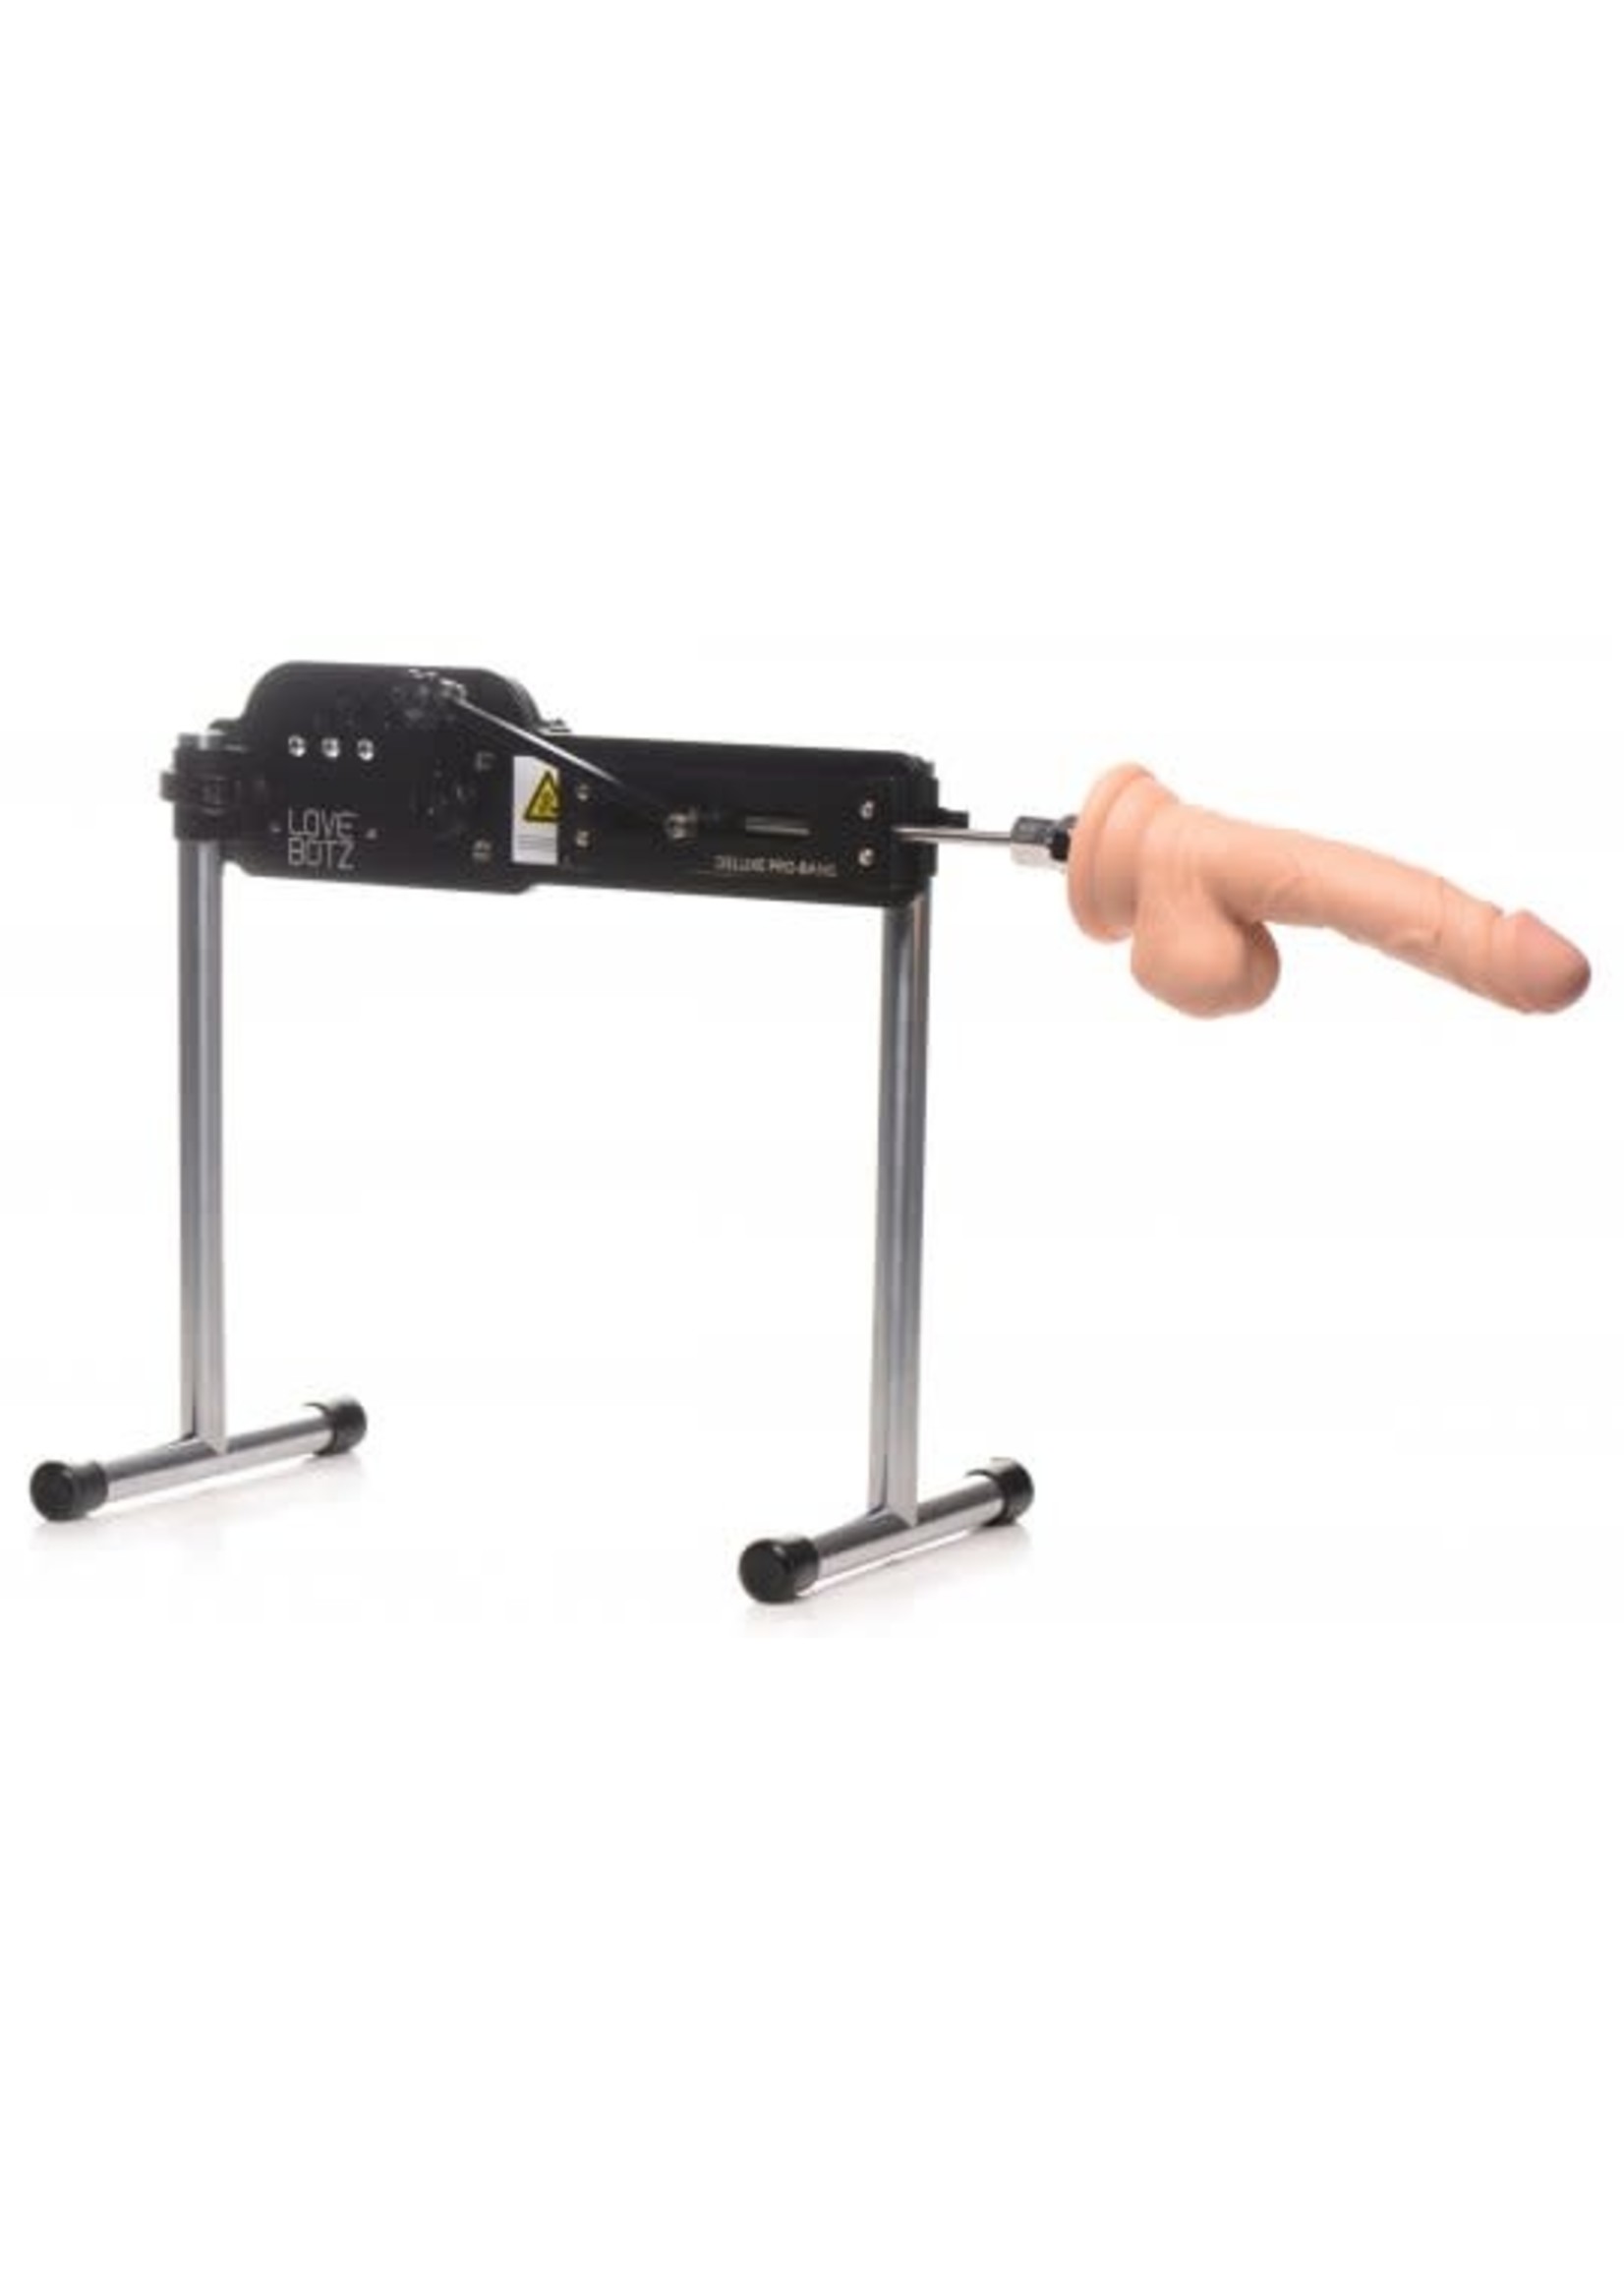 Deluxe Pro-Bang Sex Machine with Remote Control